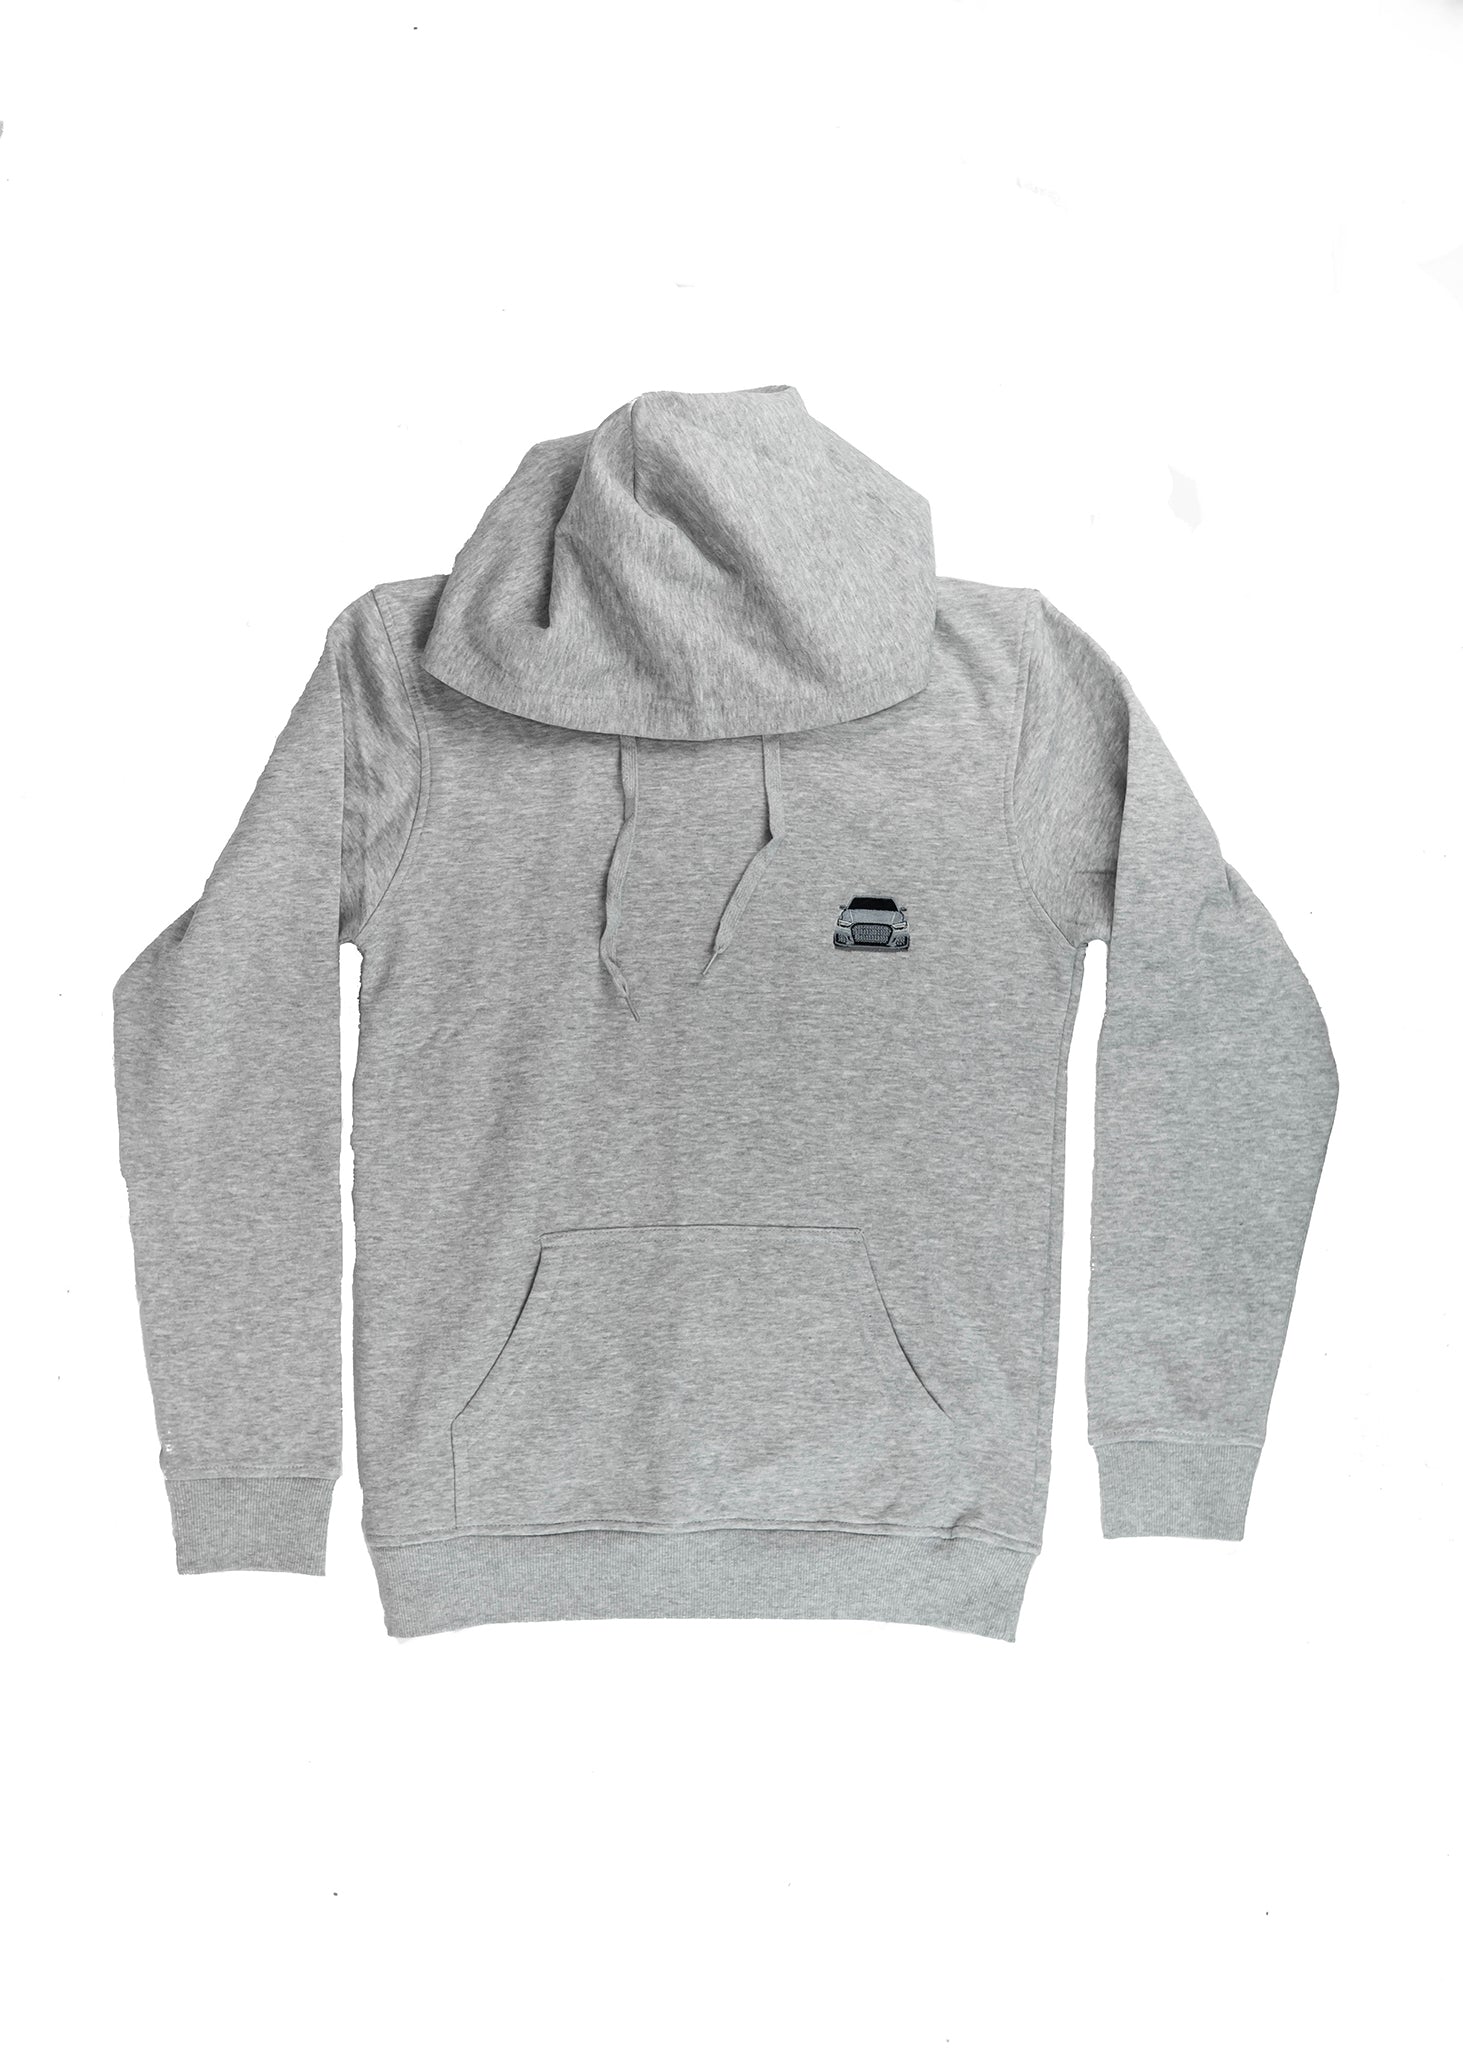 A light grey unisex hoodie for men and women. Full size front view of the gray sweater with an embroidered 8V RS3 on the left chest. Fabric composition is cotton, polyester, and rayon. The material is very soft, stretchy, and non-transparent. The style of this hoodie is long sleeve, crewneck with a hood, hooded, with embroidery on the left chest.